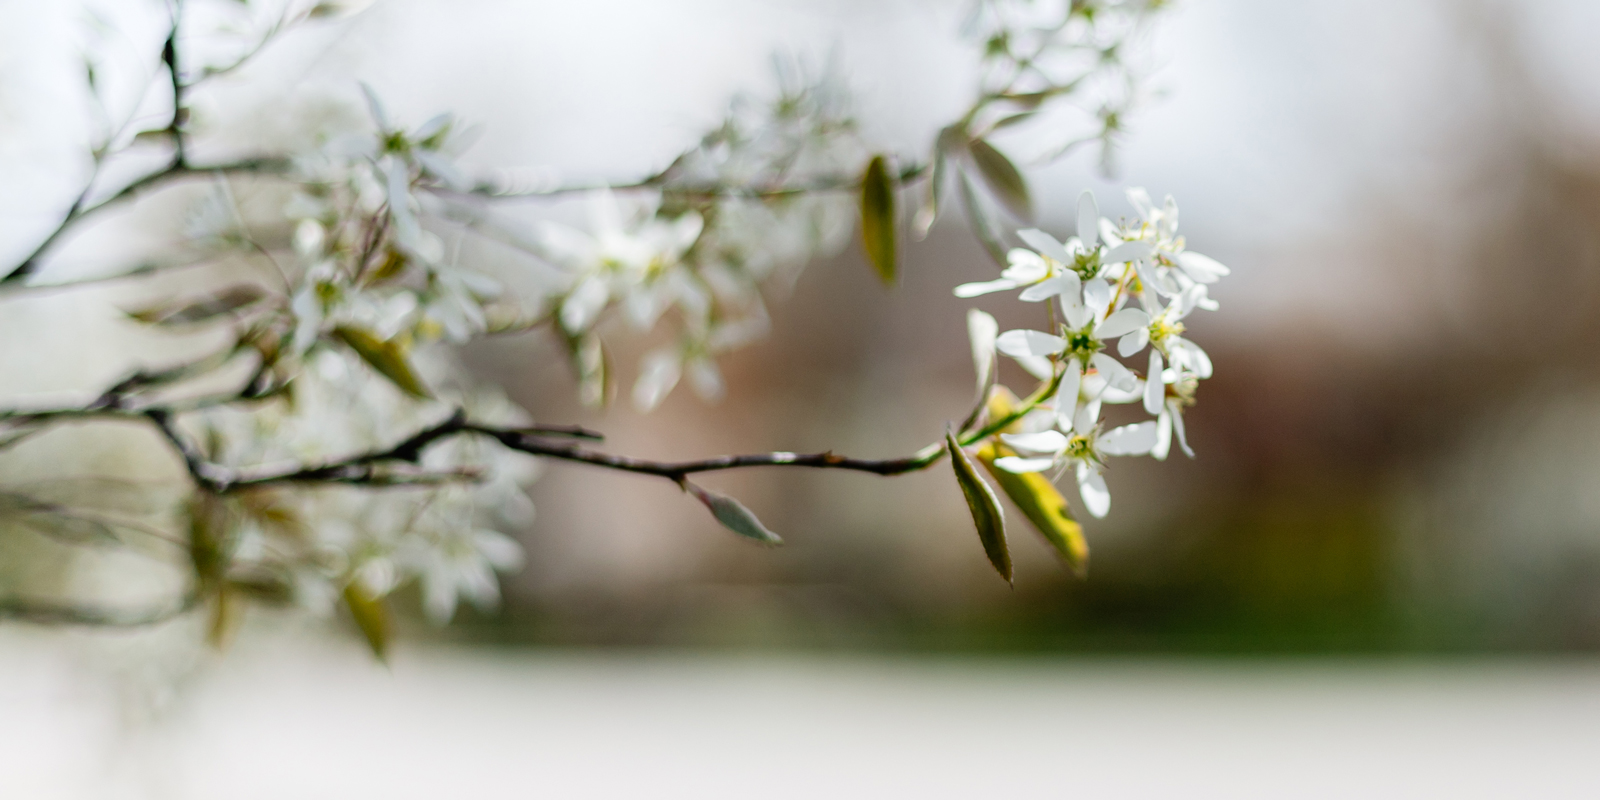 Surprised by Hope Blog Cover Photo, Flowers on Campus